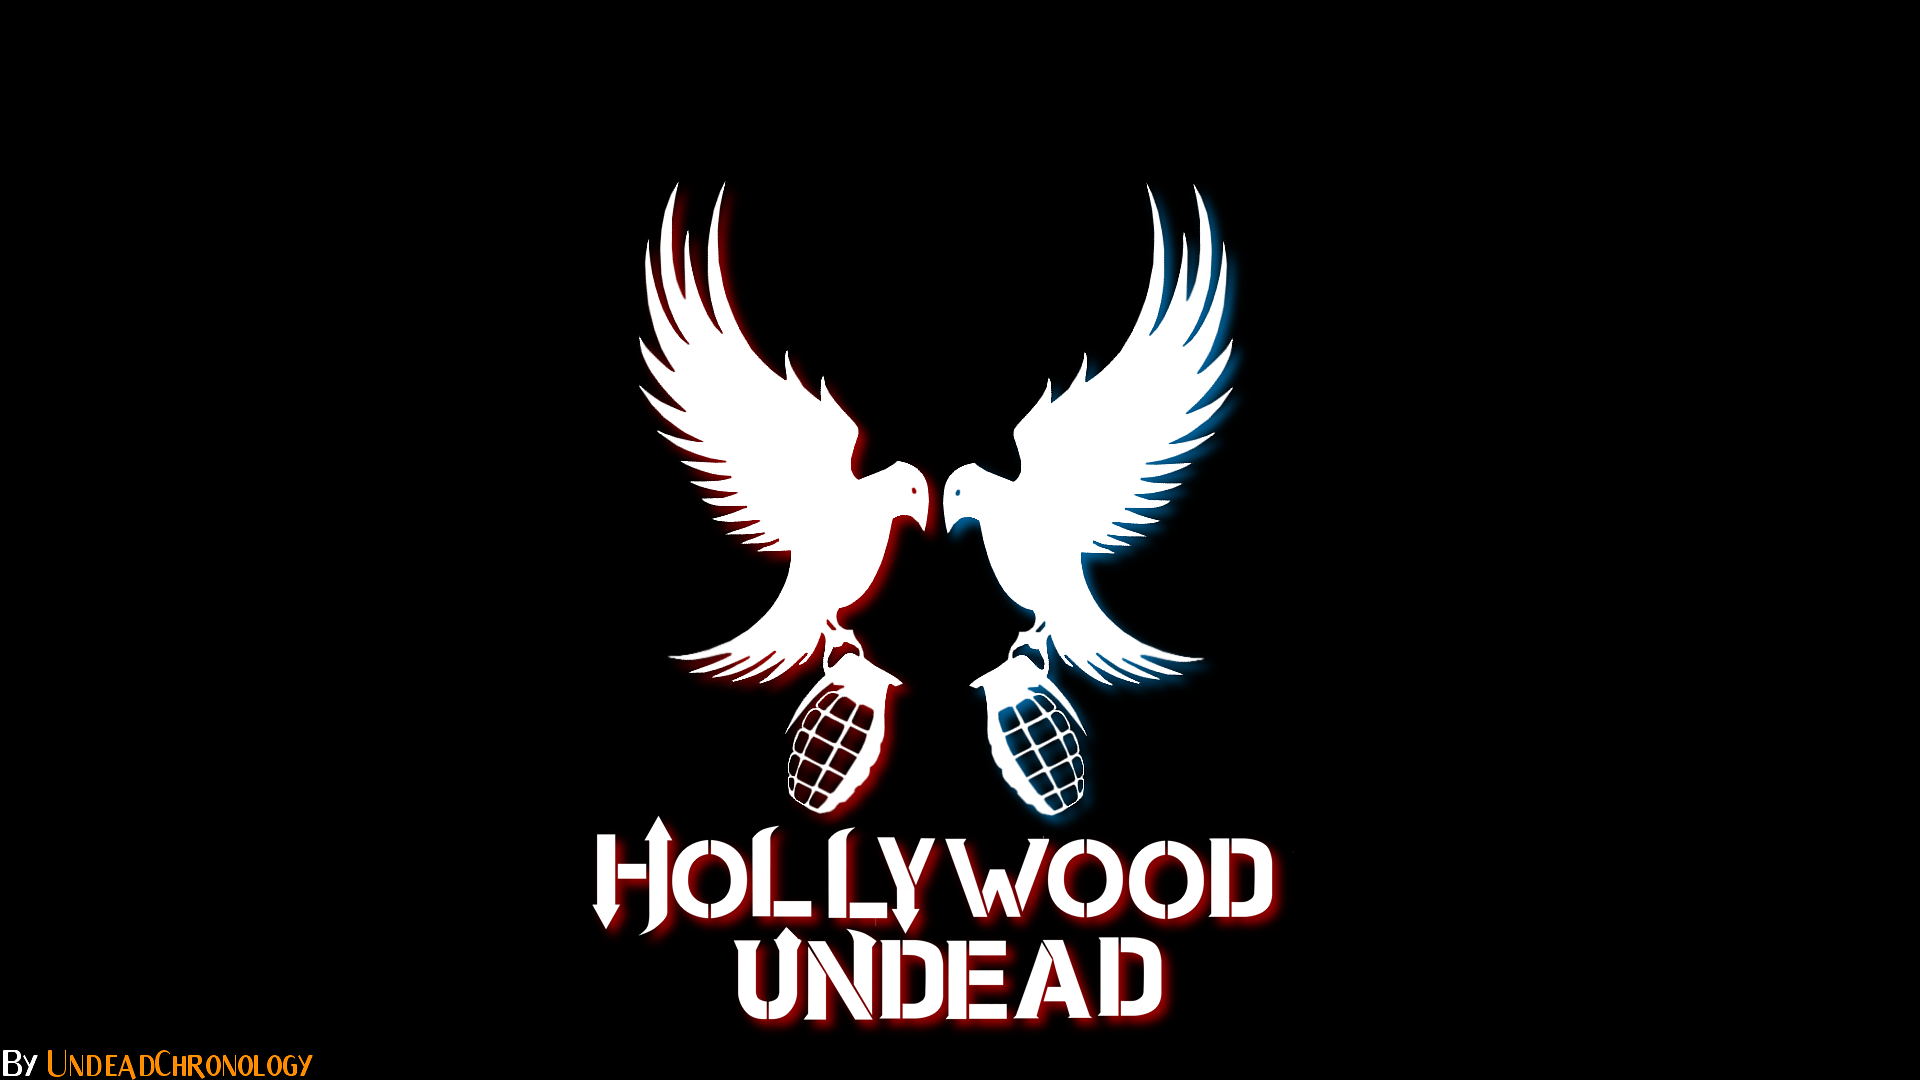 Simple Hollywood Undead Wallpaper 1080p by DcfEmpx on